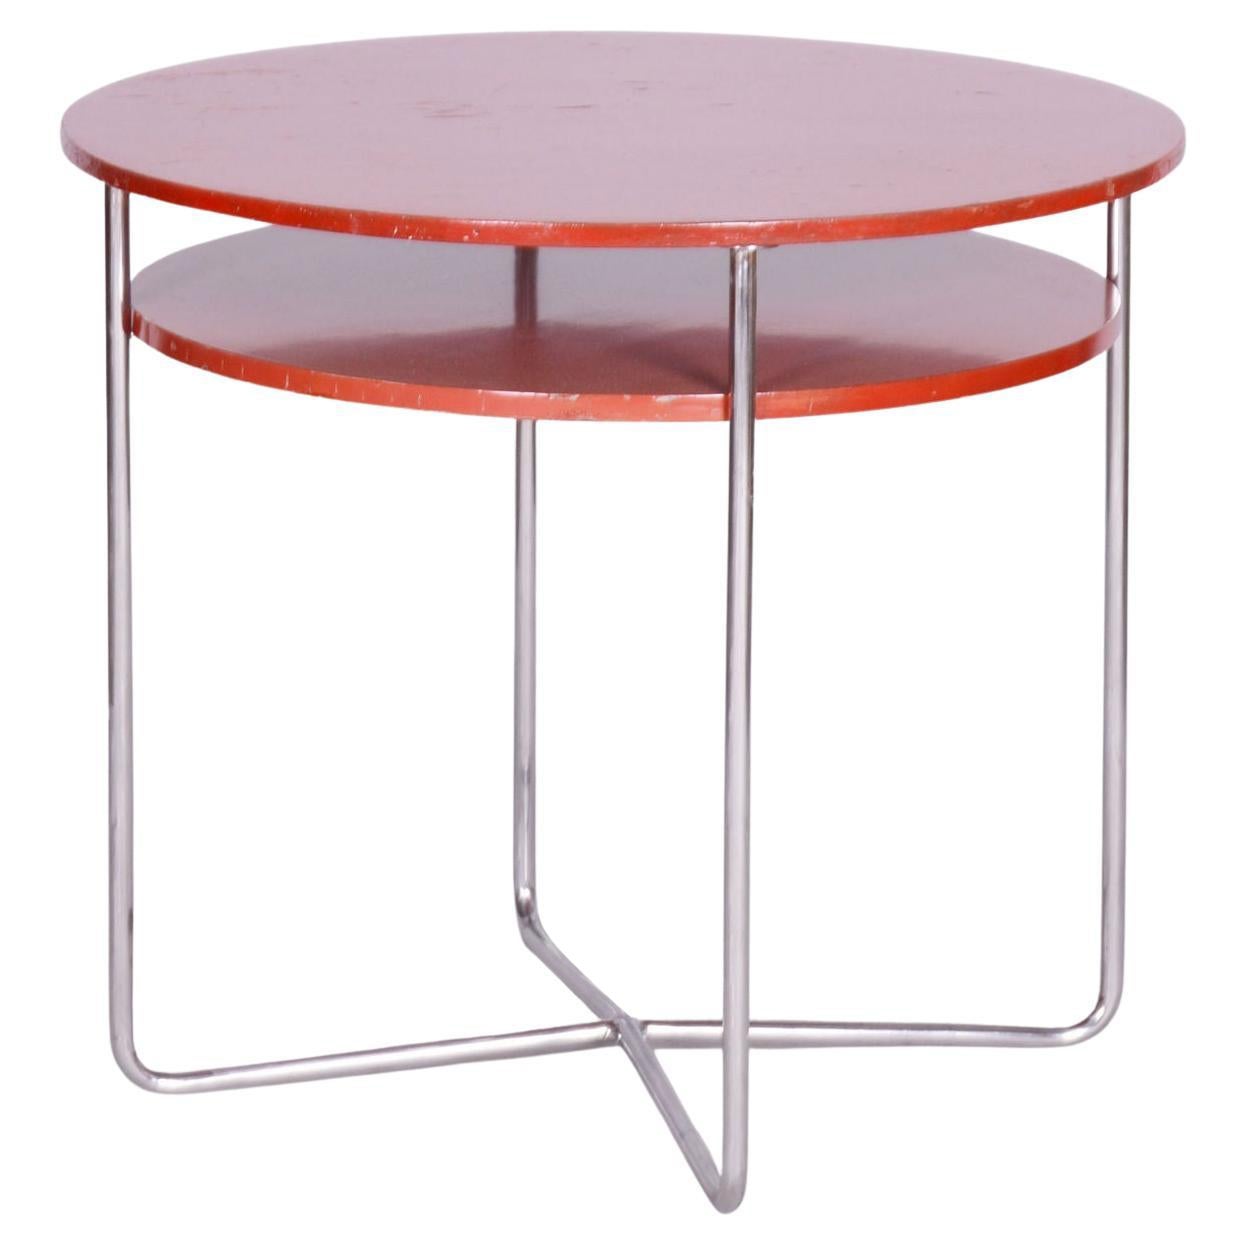 Restored Bauhaus Small Round Table, Chrome-Plated Steel, Czechia, 1930s For Sale